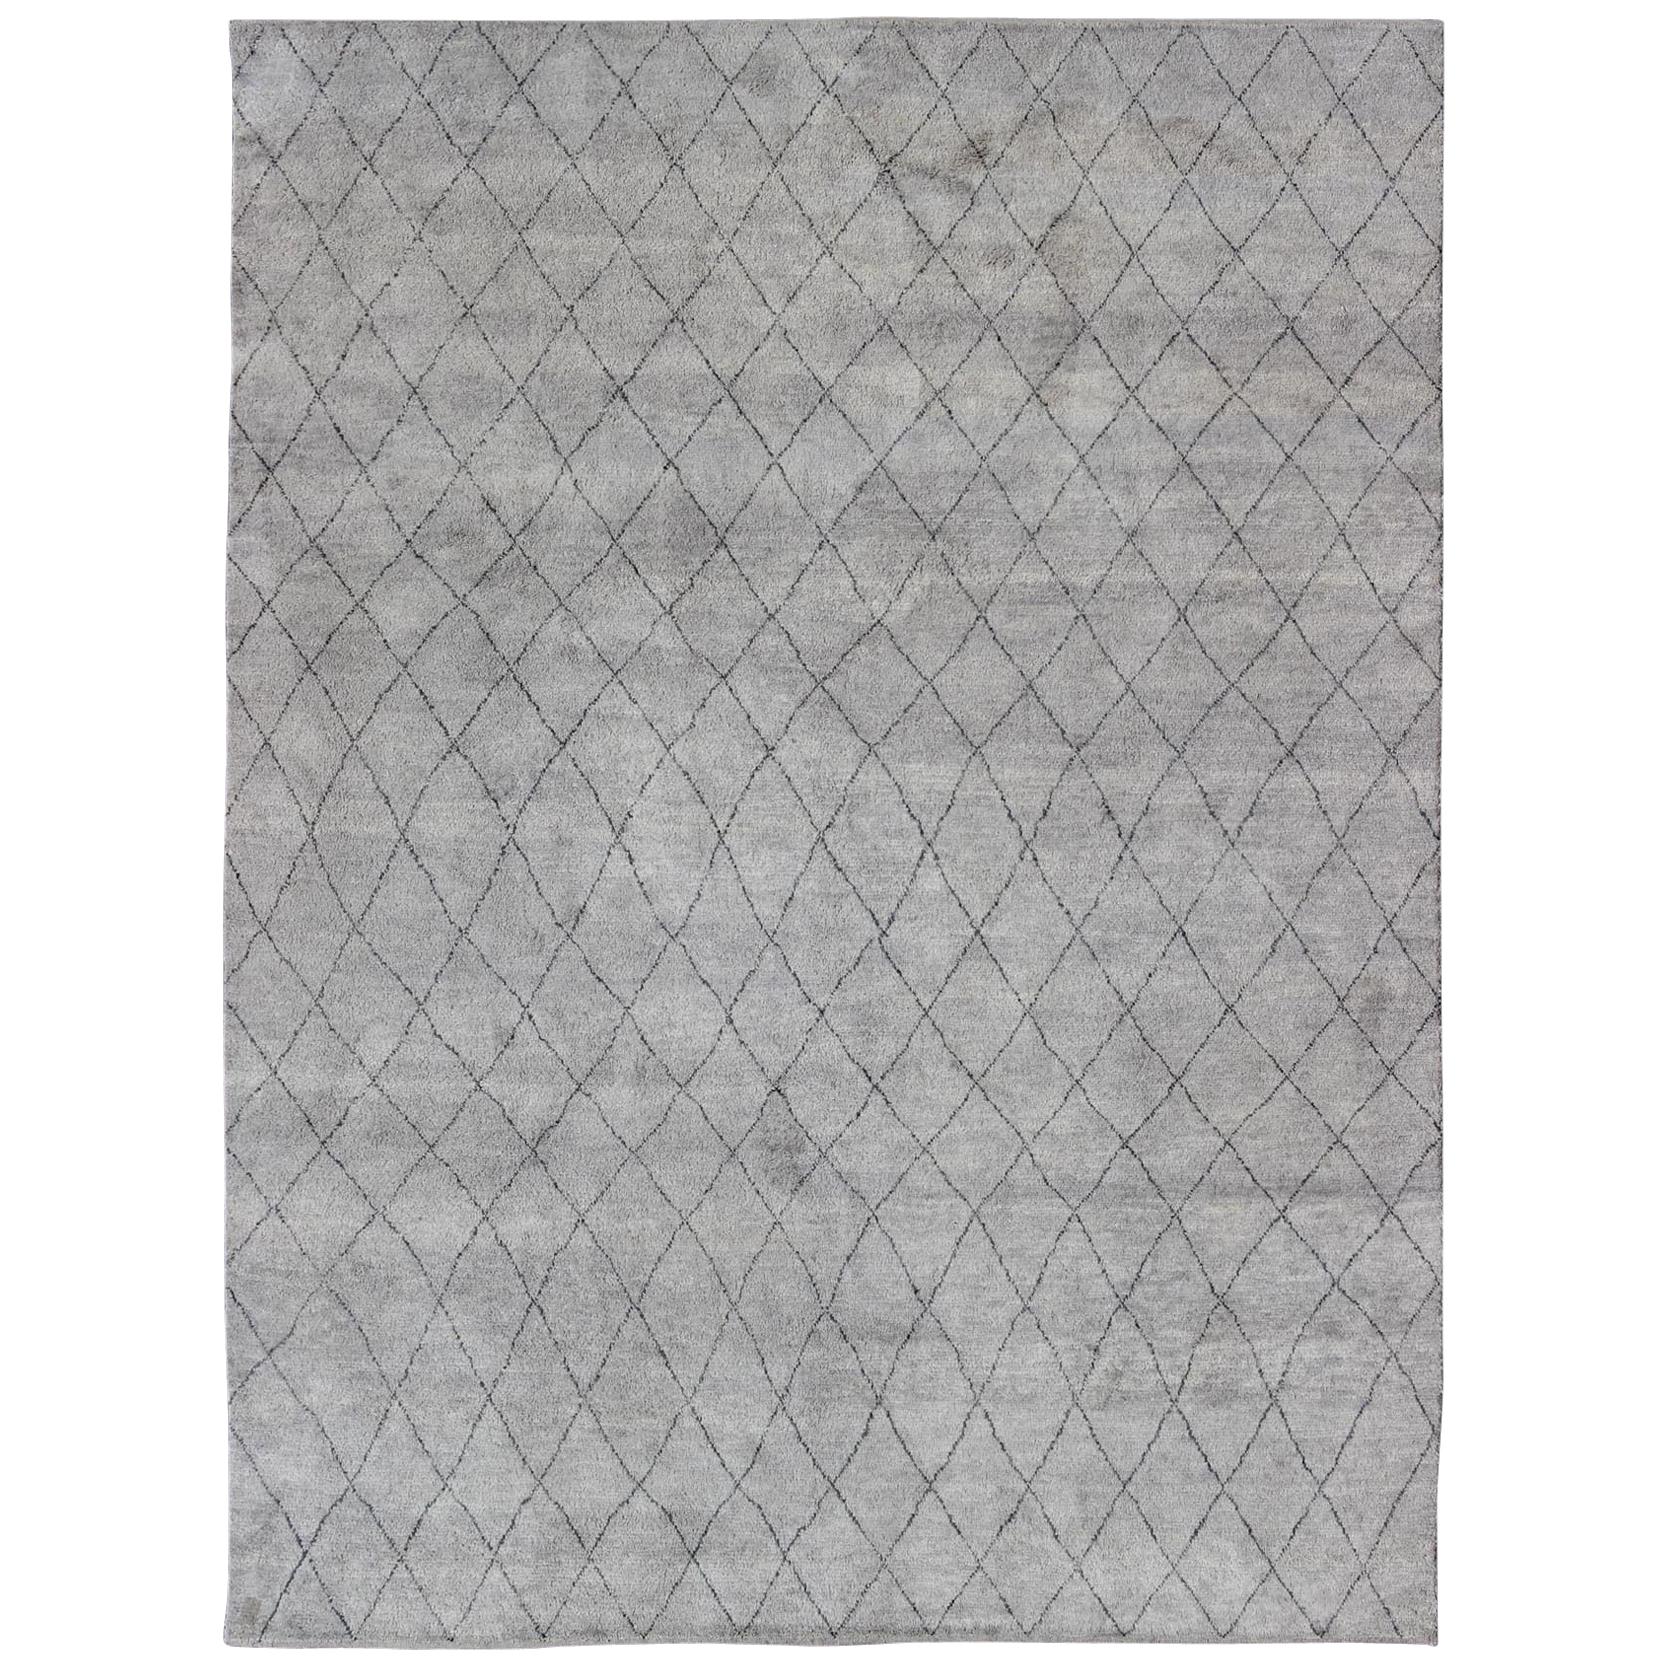 Modern Moroccan Rug with All-Over Diamond Design in Charcoal and Gray